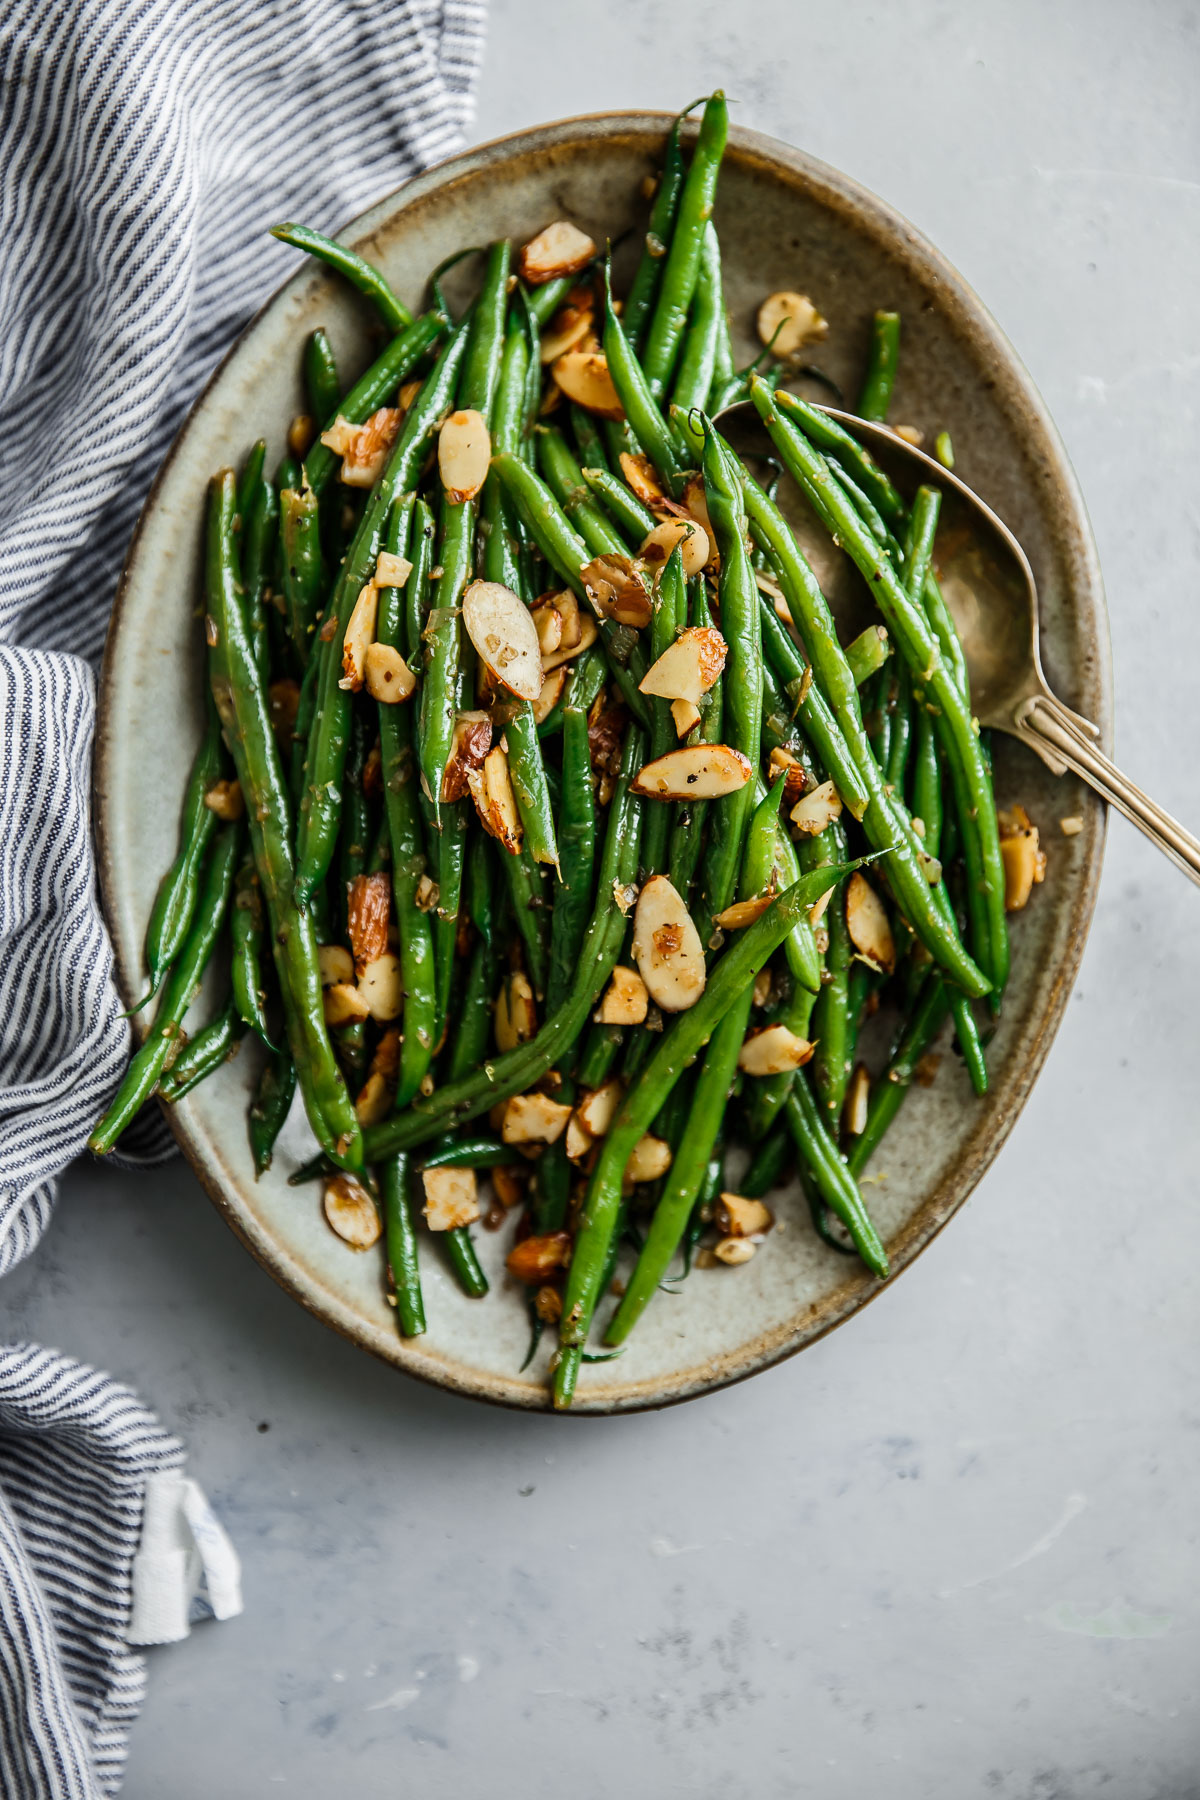 Green Beans Almondine Green Beans With Almonds A Beautiful Plate,Bread Storage Basket